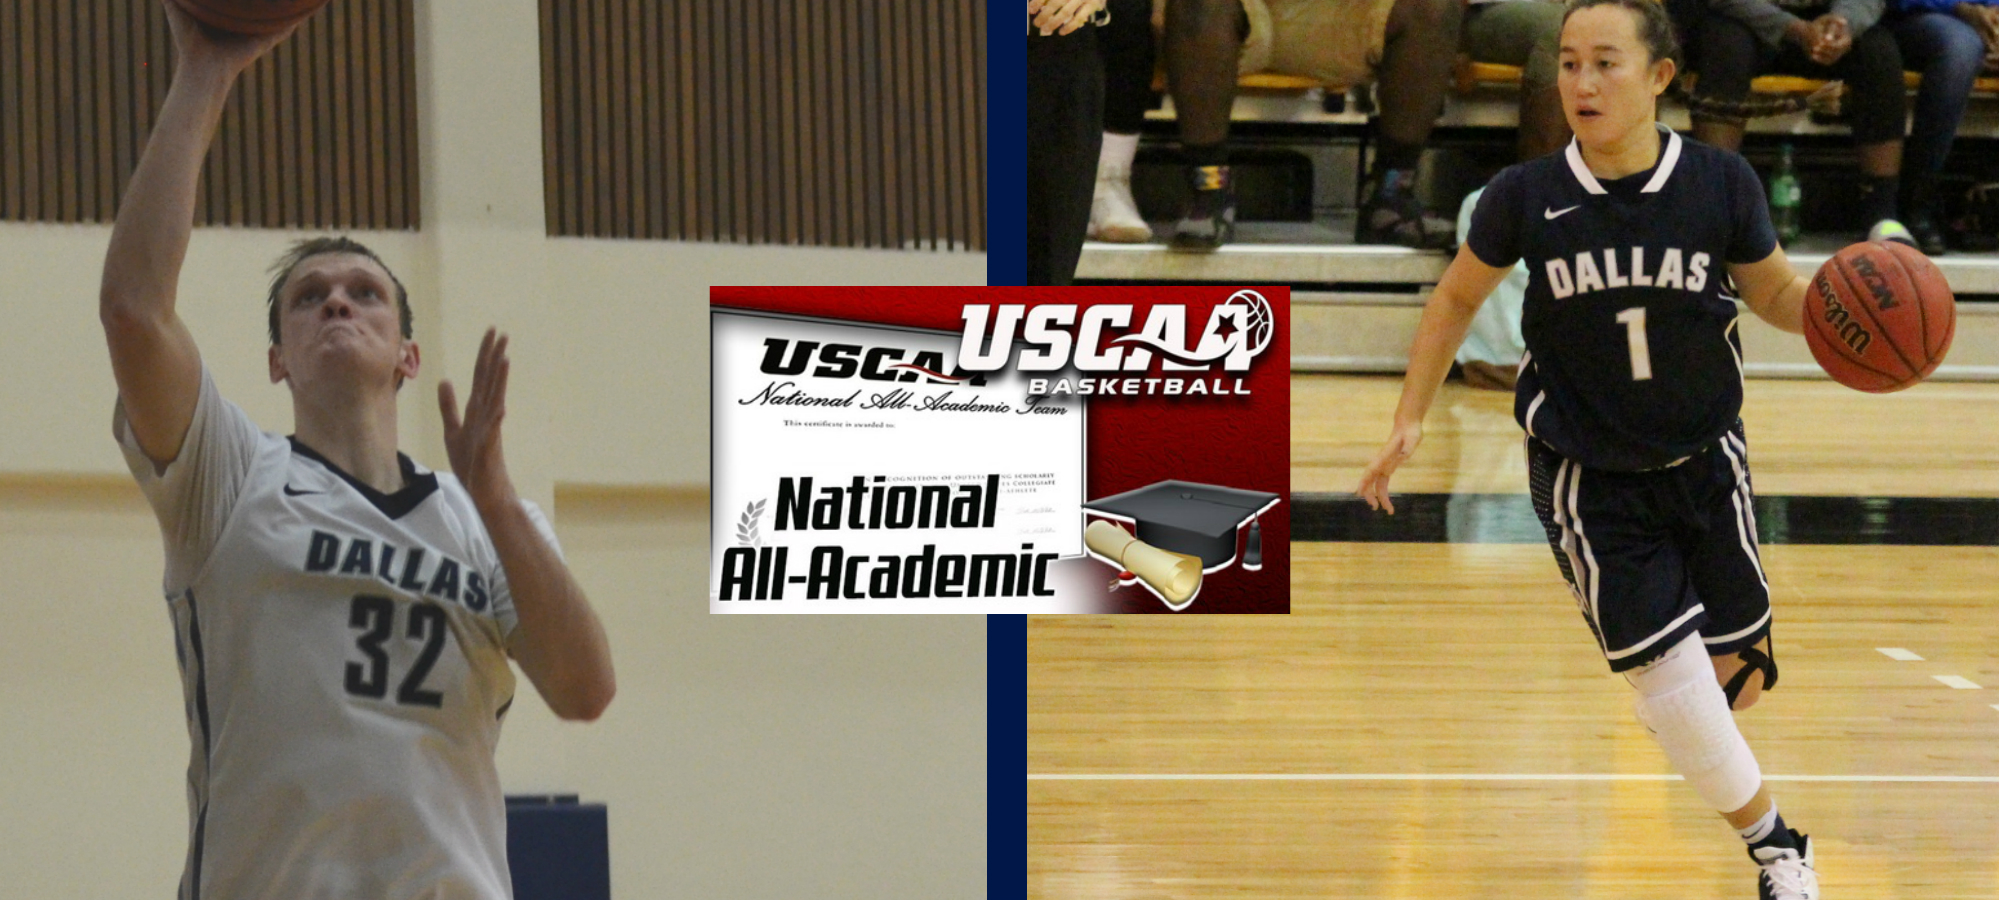 3rd Year in a Row Kaiser on USCAA National All-Academic Team; Tso Named for Women's Basketball